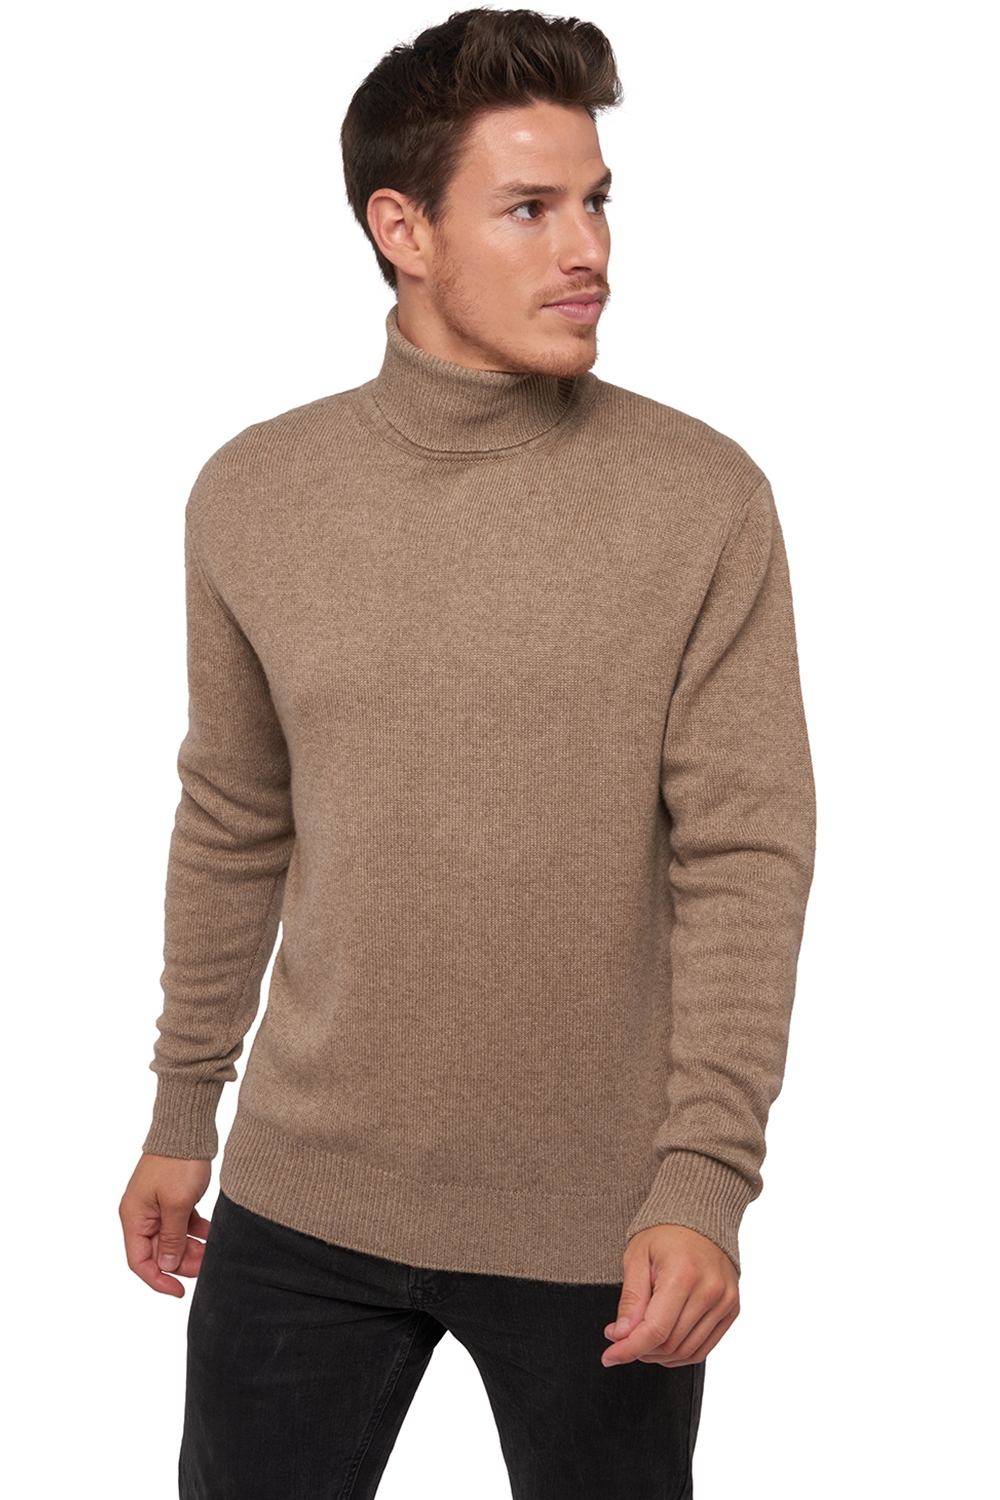 Cachemire pull homme edgar 4f natural brown m